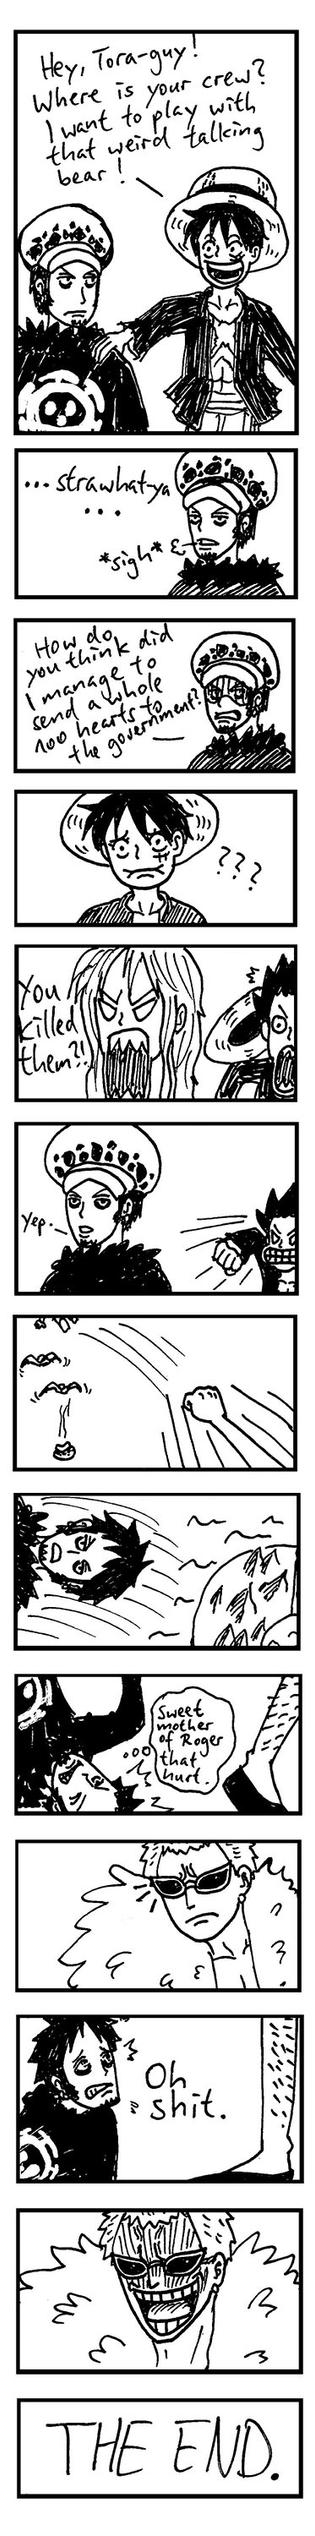 how_the_punk_hazard_arc_should_have_ended____by_tolkienop-d5vk5ij.jpg